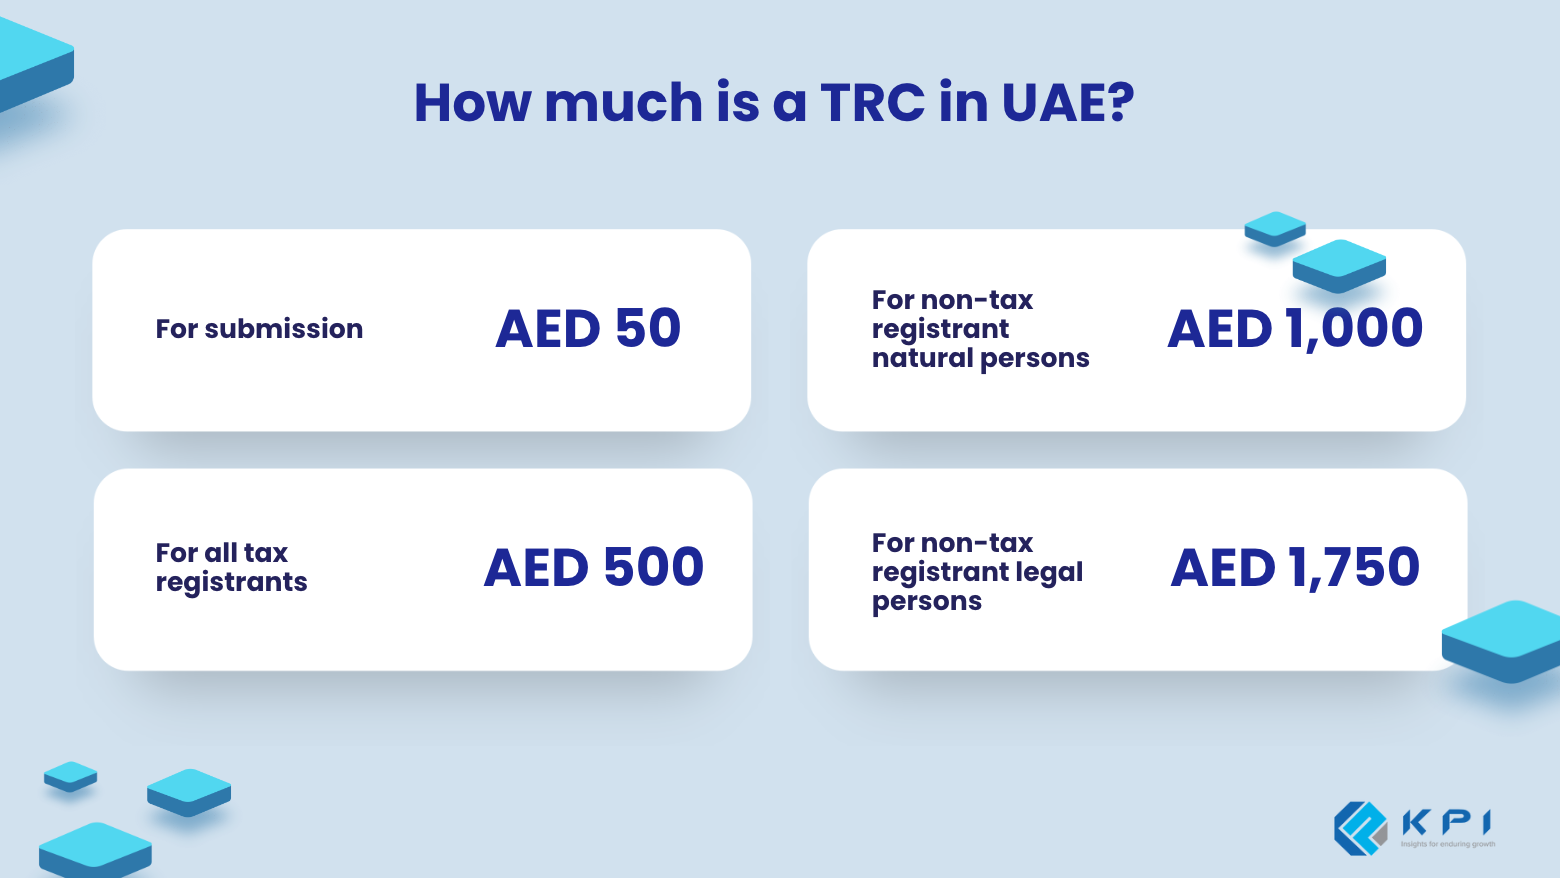 How much is TRC in UAE